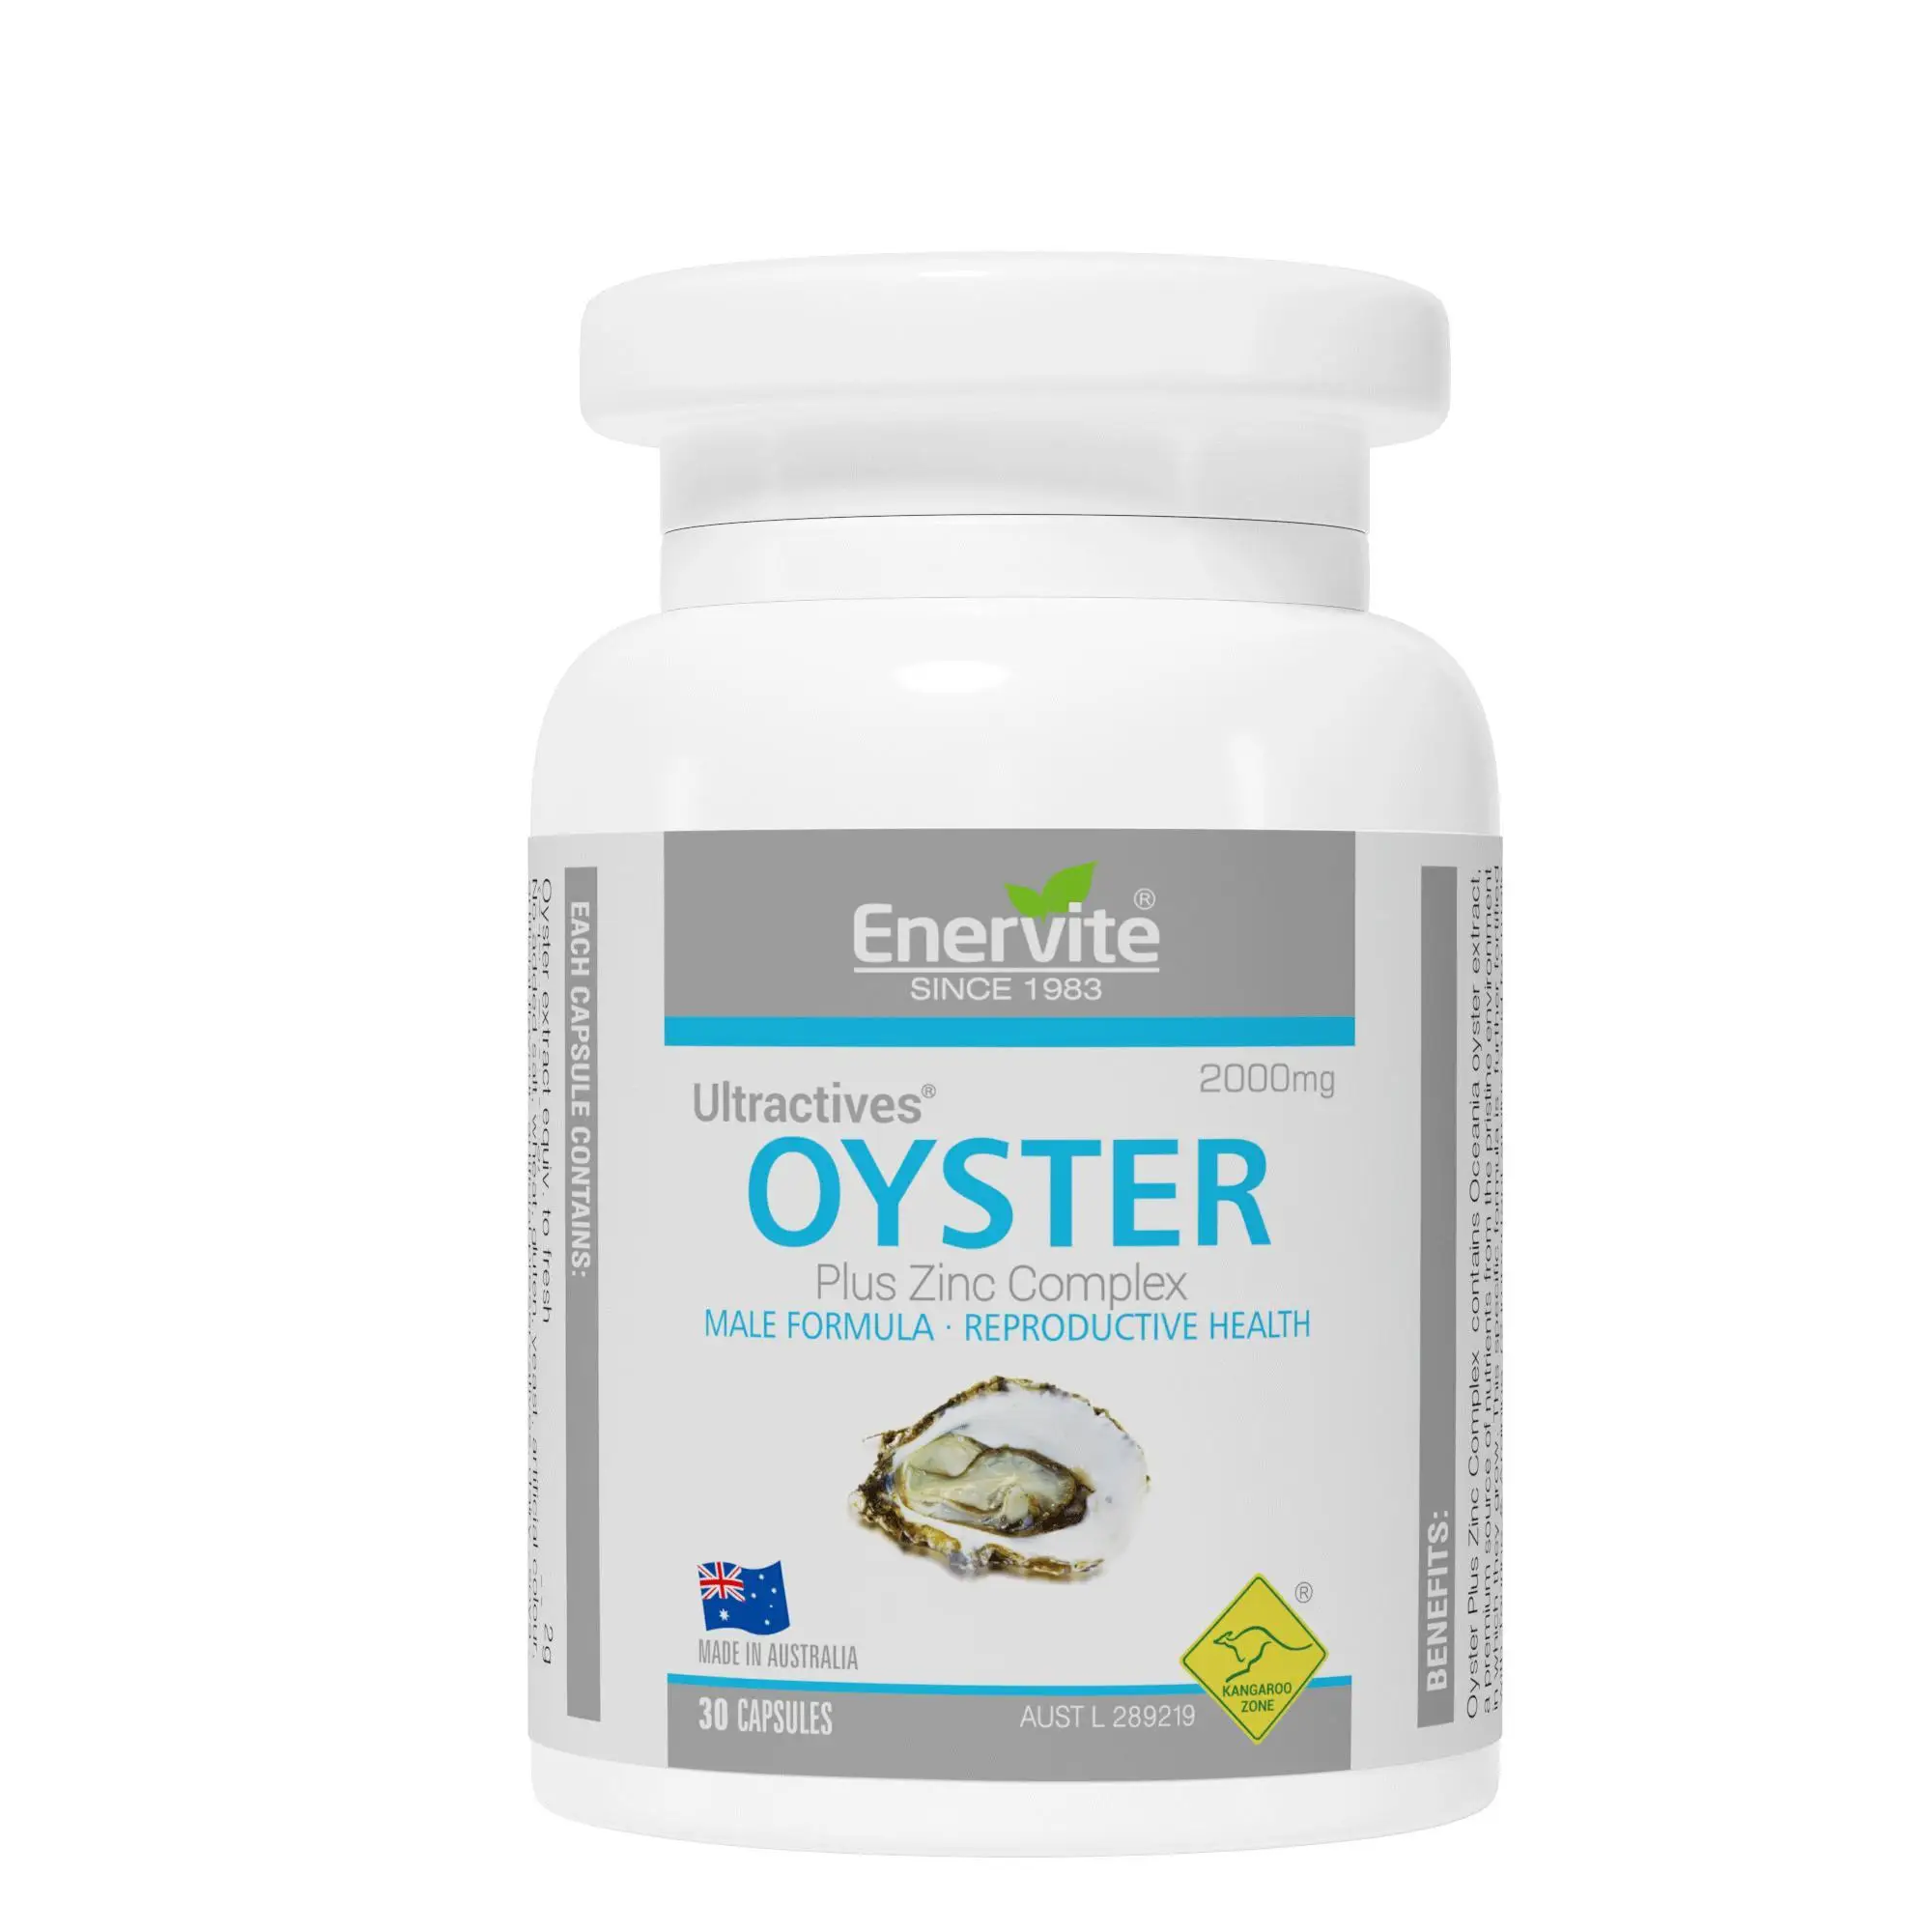 

1 Bottle 30 Pills Oyster and Oyster Essence Capsule 30 Capsules for Male Kidney Nourishing and Zinc Nourishing Health Products